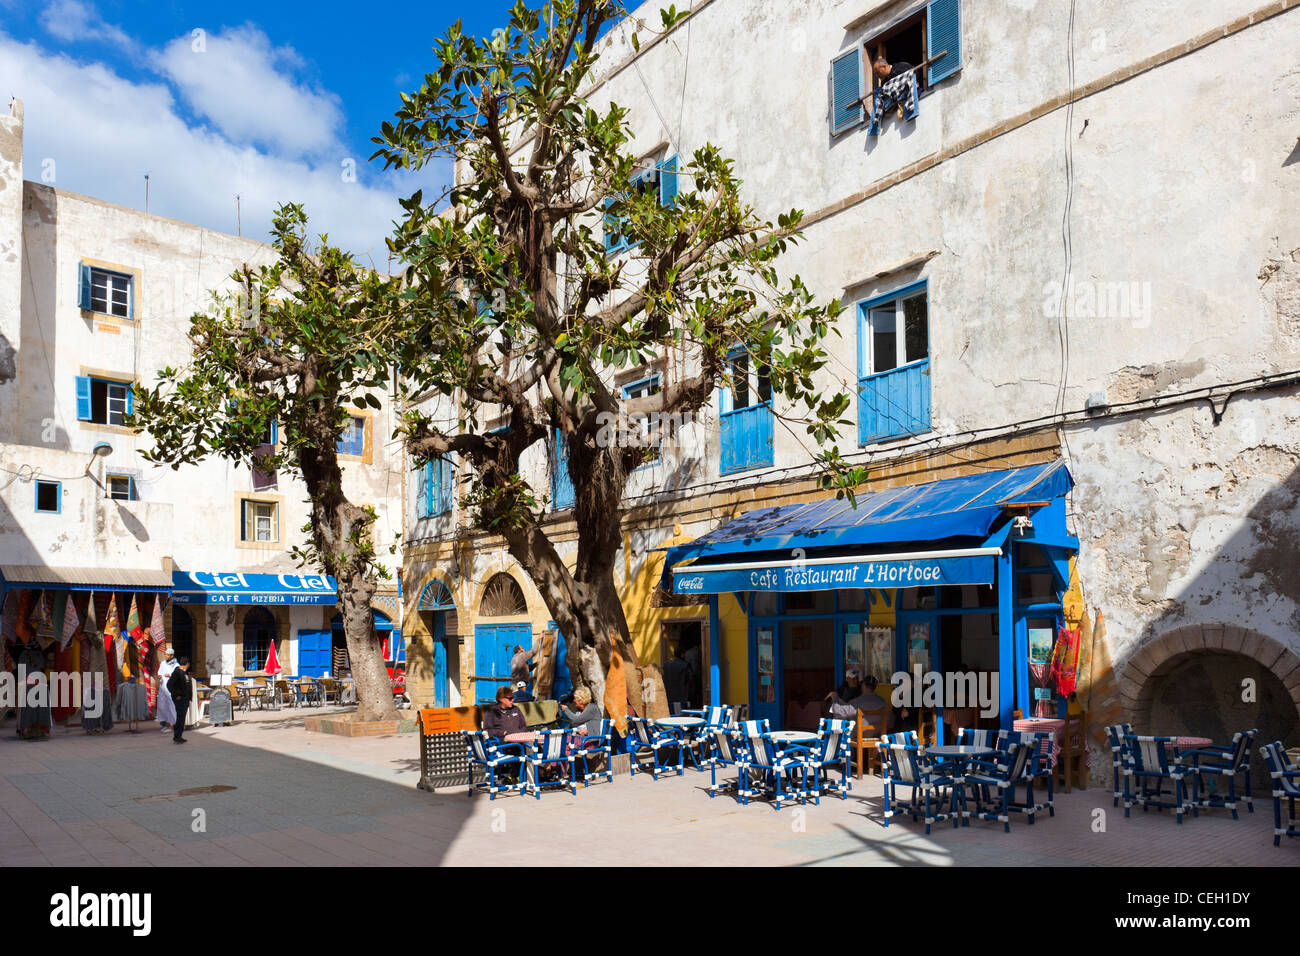 Cafes in the Place Chefchaouni near the Medina and Kasbah, Essaouira, Morocco, North Africa Stock Photo